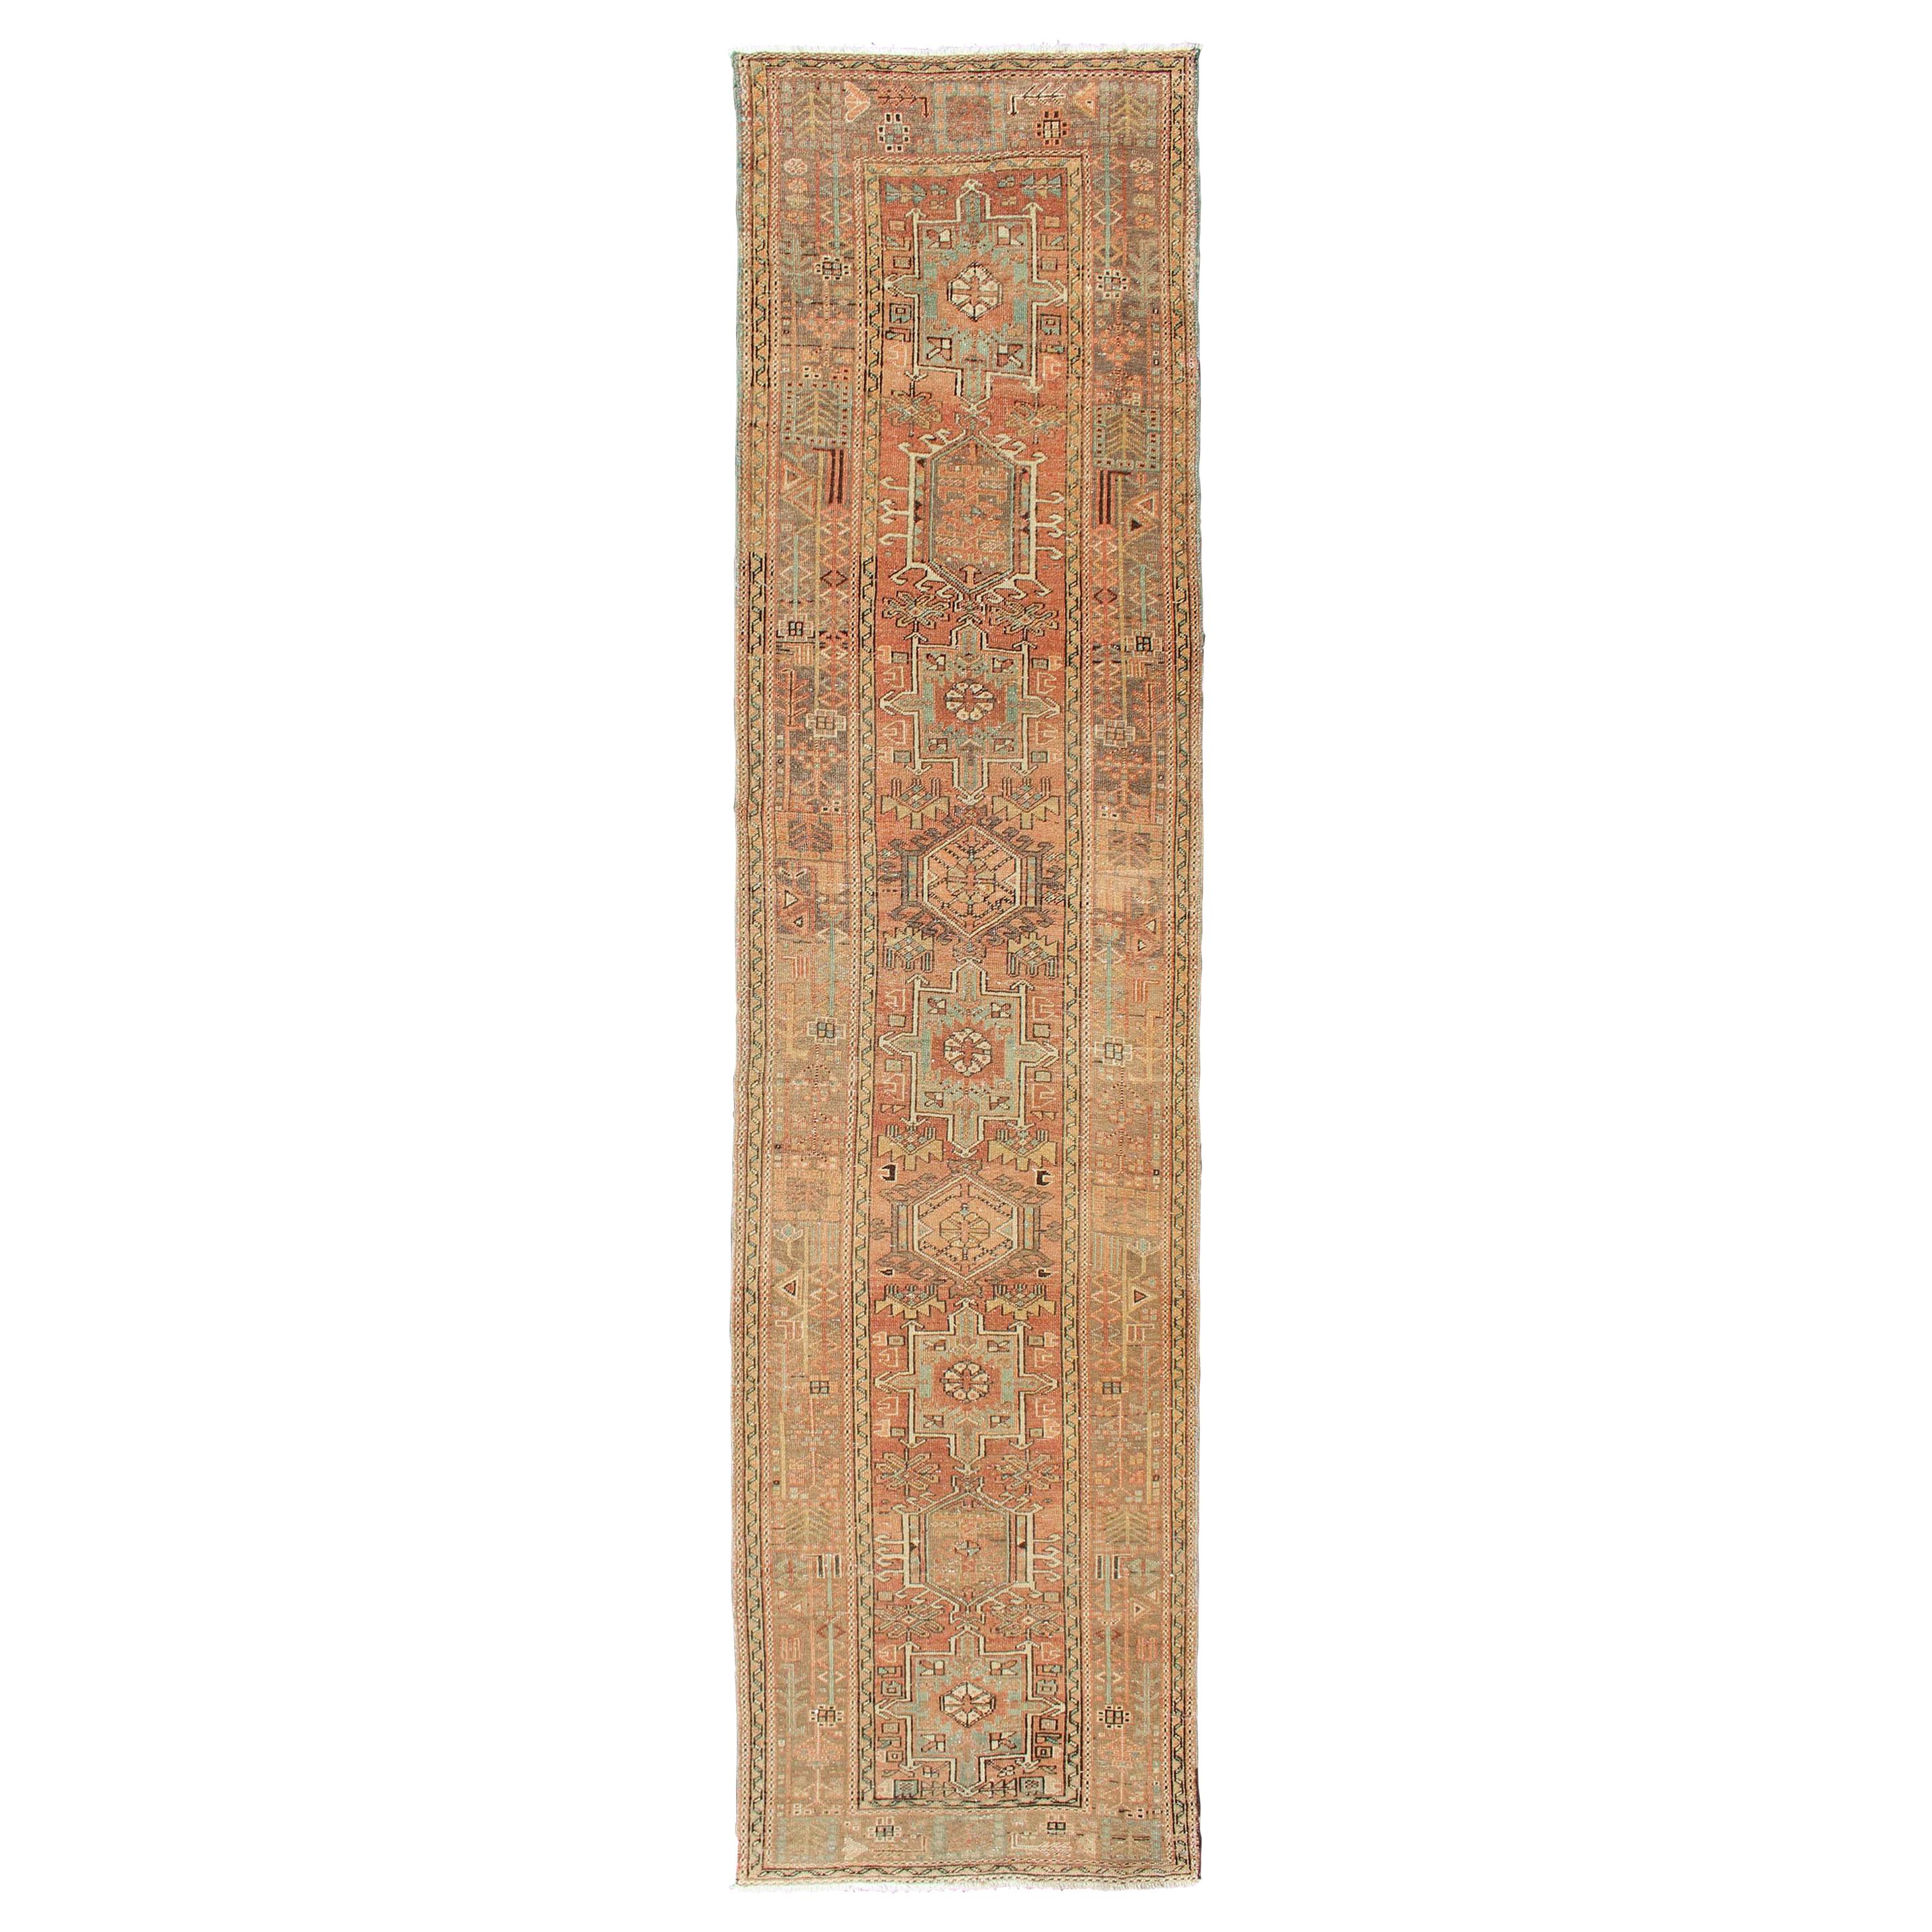 Soft Red or Salmon, Long Persian Heriz Runner with Geometric Medallions